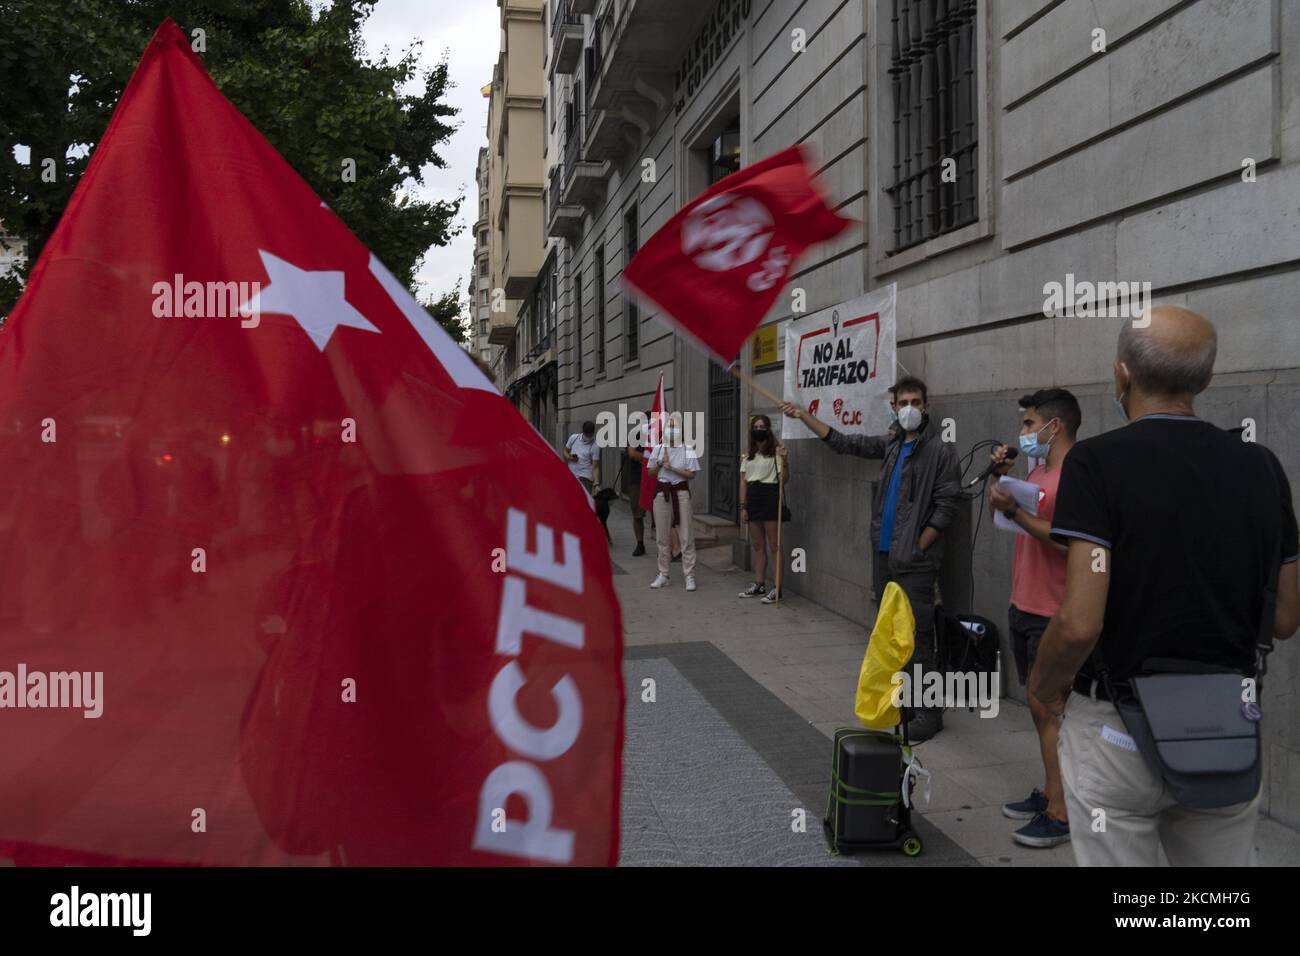 With red flags, members of the Communist Workers' Party (PCTE), concentrated against the rise in the price of electricity known as ''el tarifazo'' in the city of Santander, Spain, on September 13, 2021. (Photo by Joaquin Gomez Sastre/NurPhoto) Stock Photo